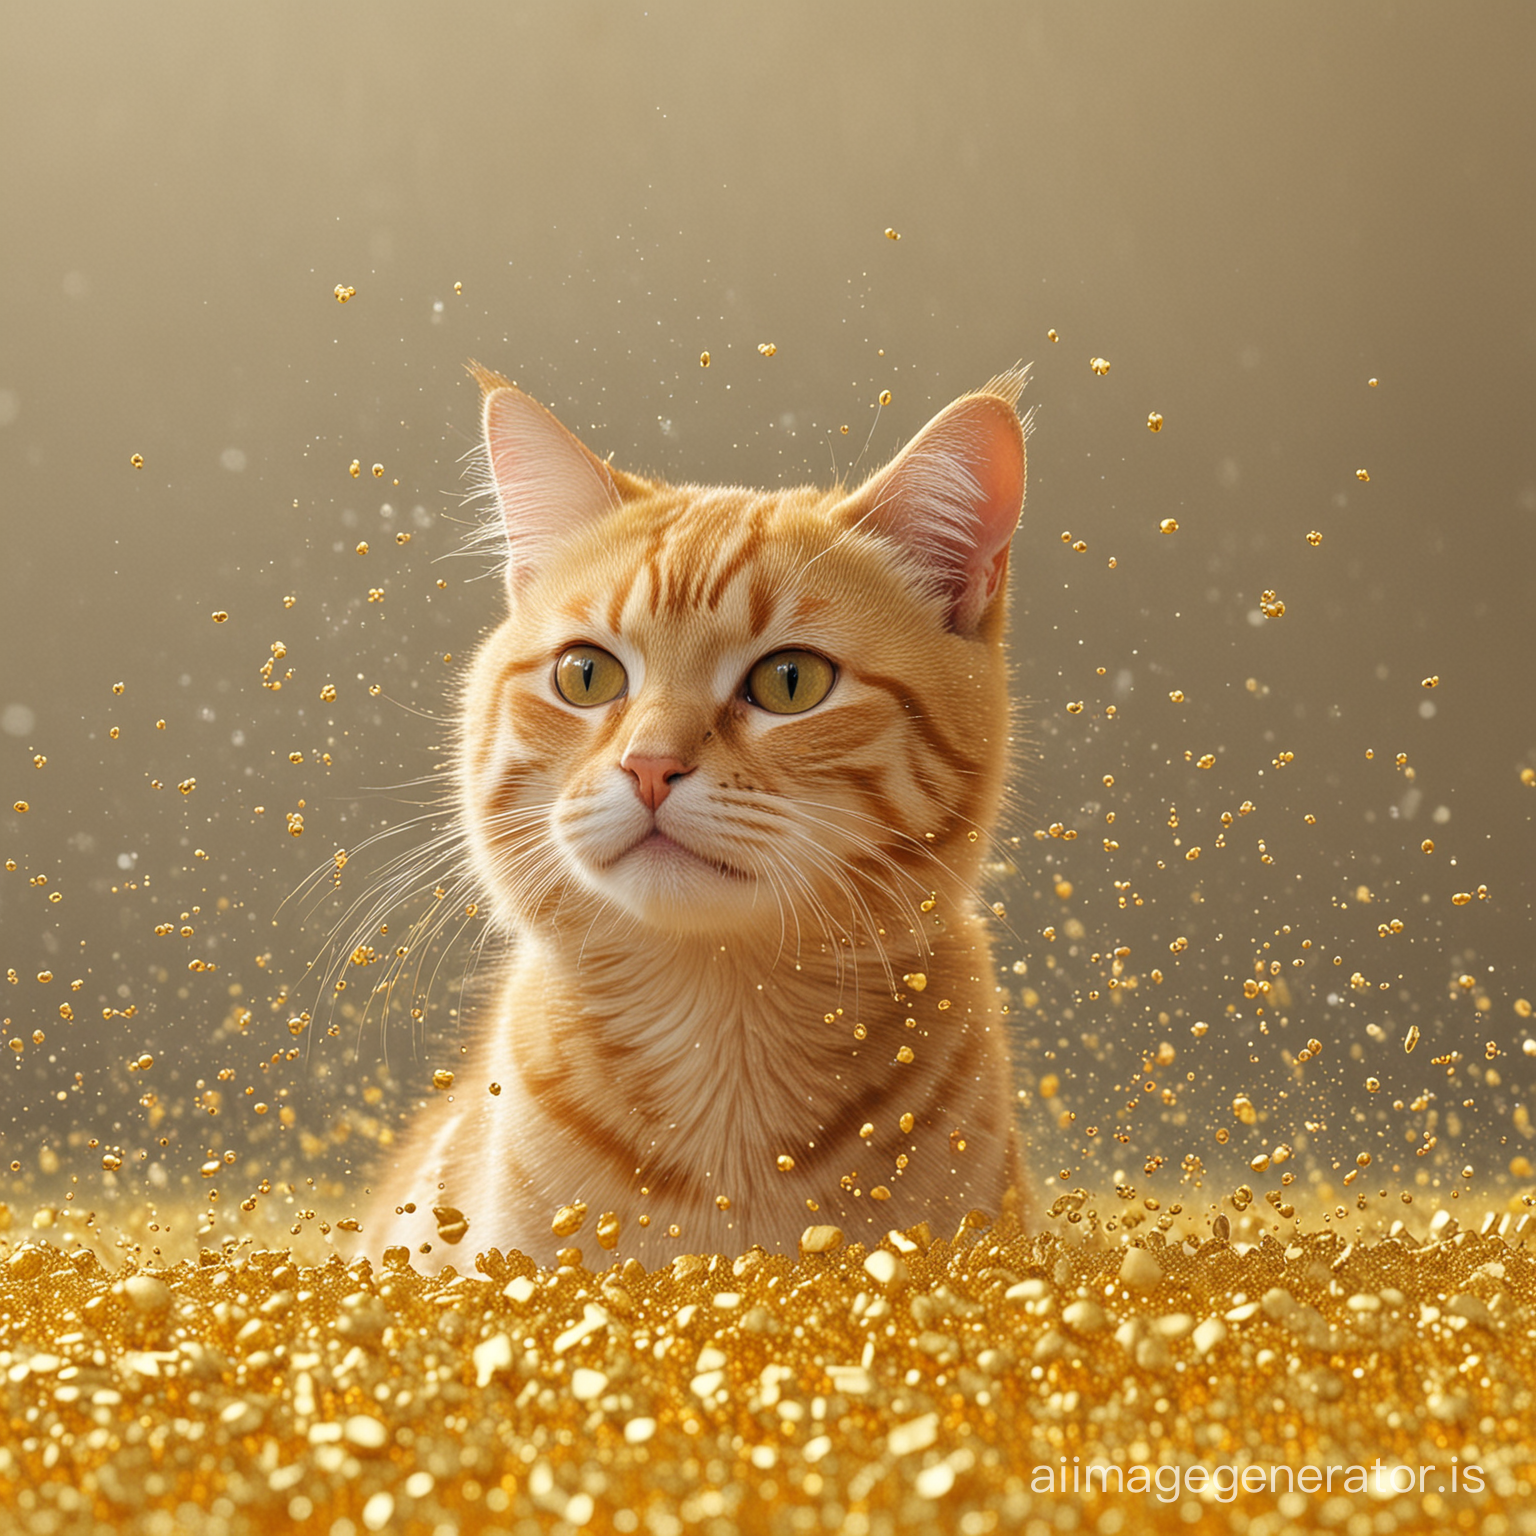 Gold particles raining on yellow striped cat